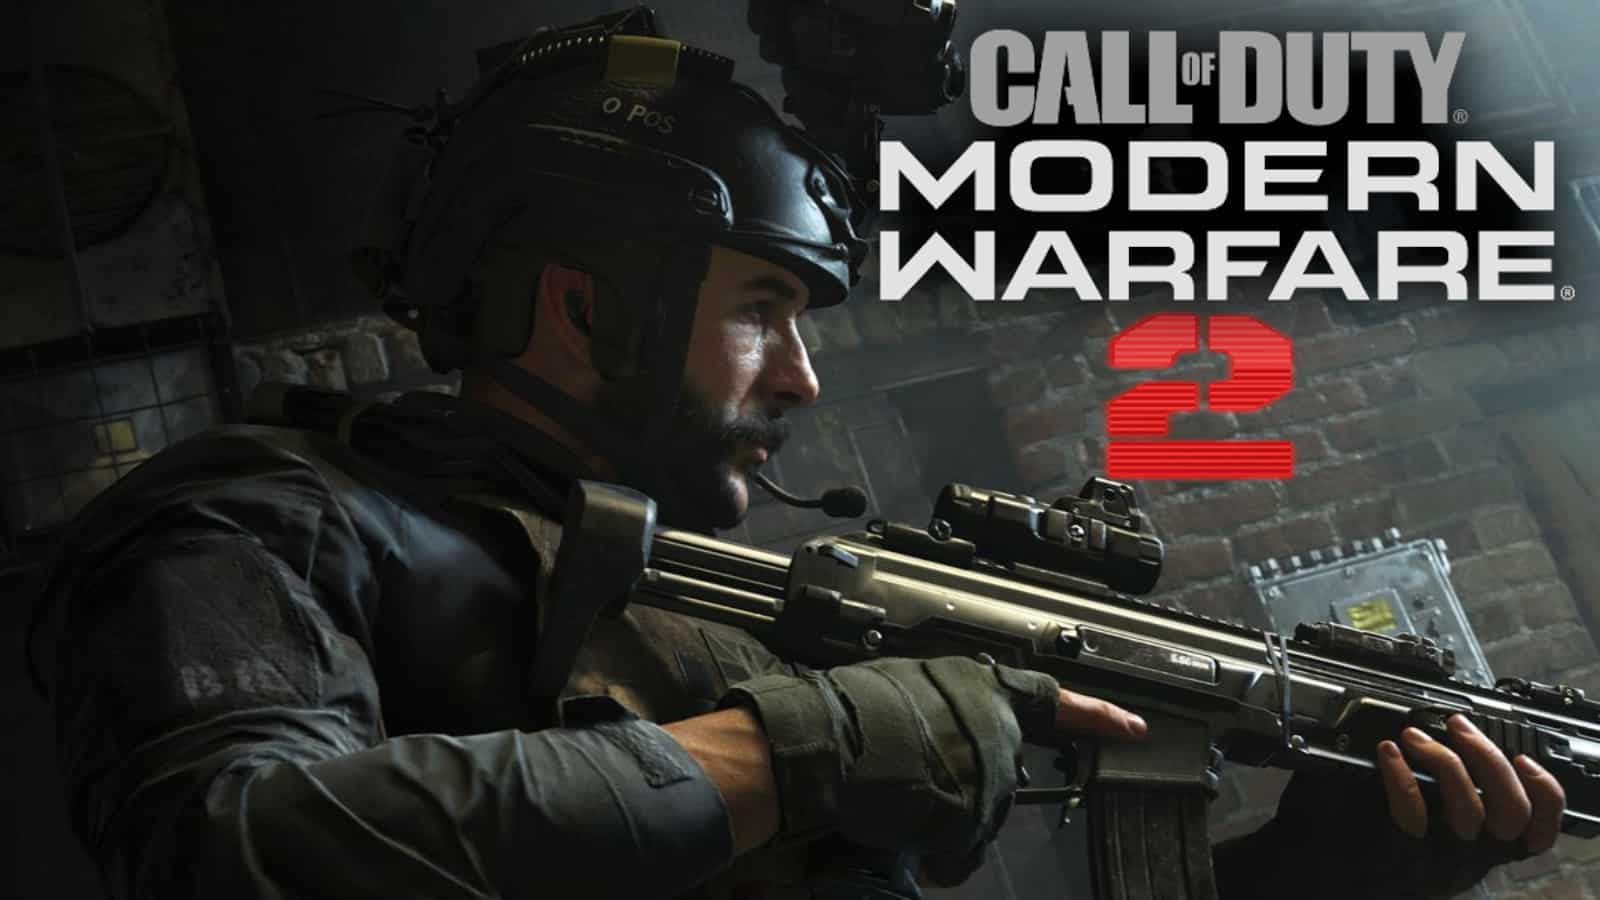 Weapon animations in Call of Duty: Modern Warfare were done by hand